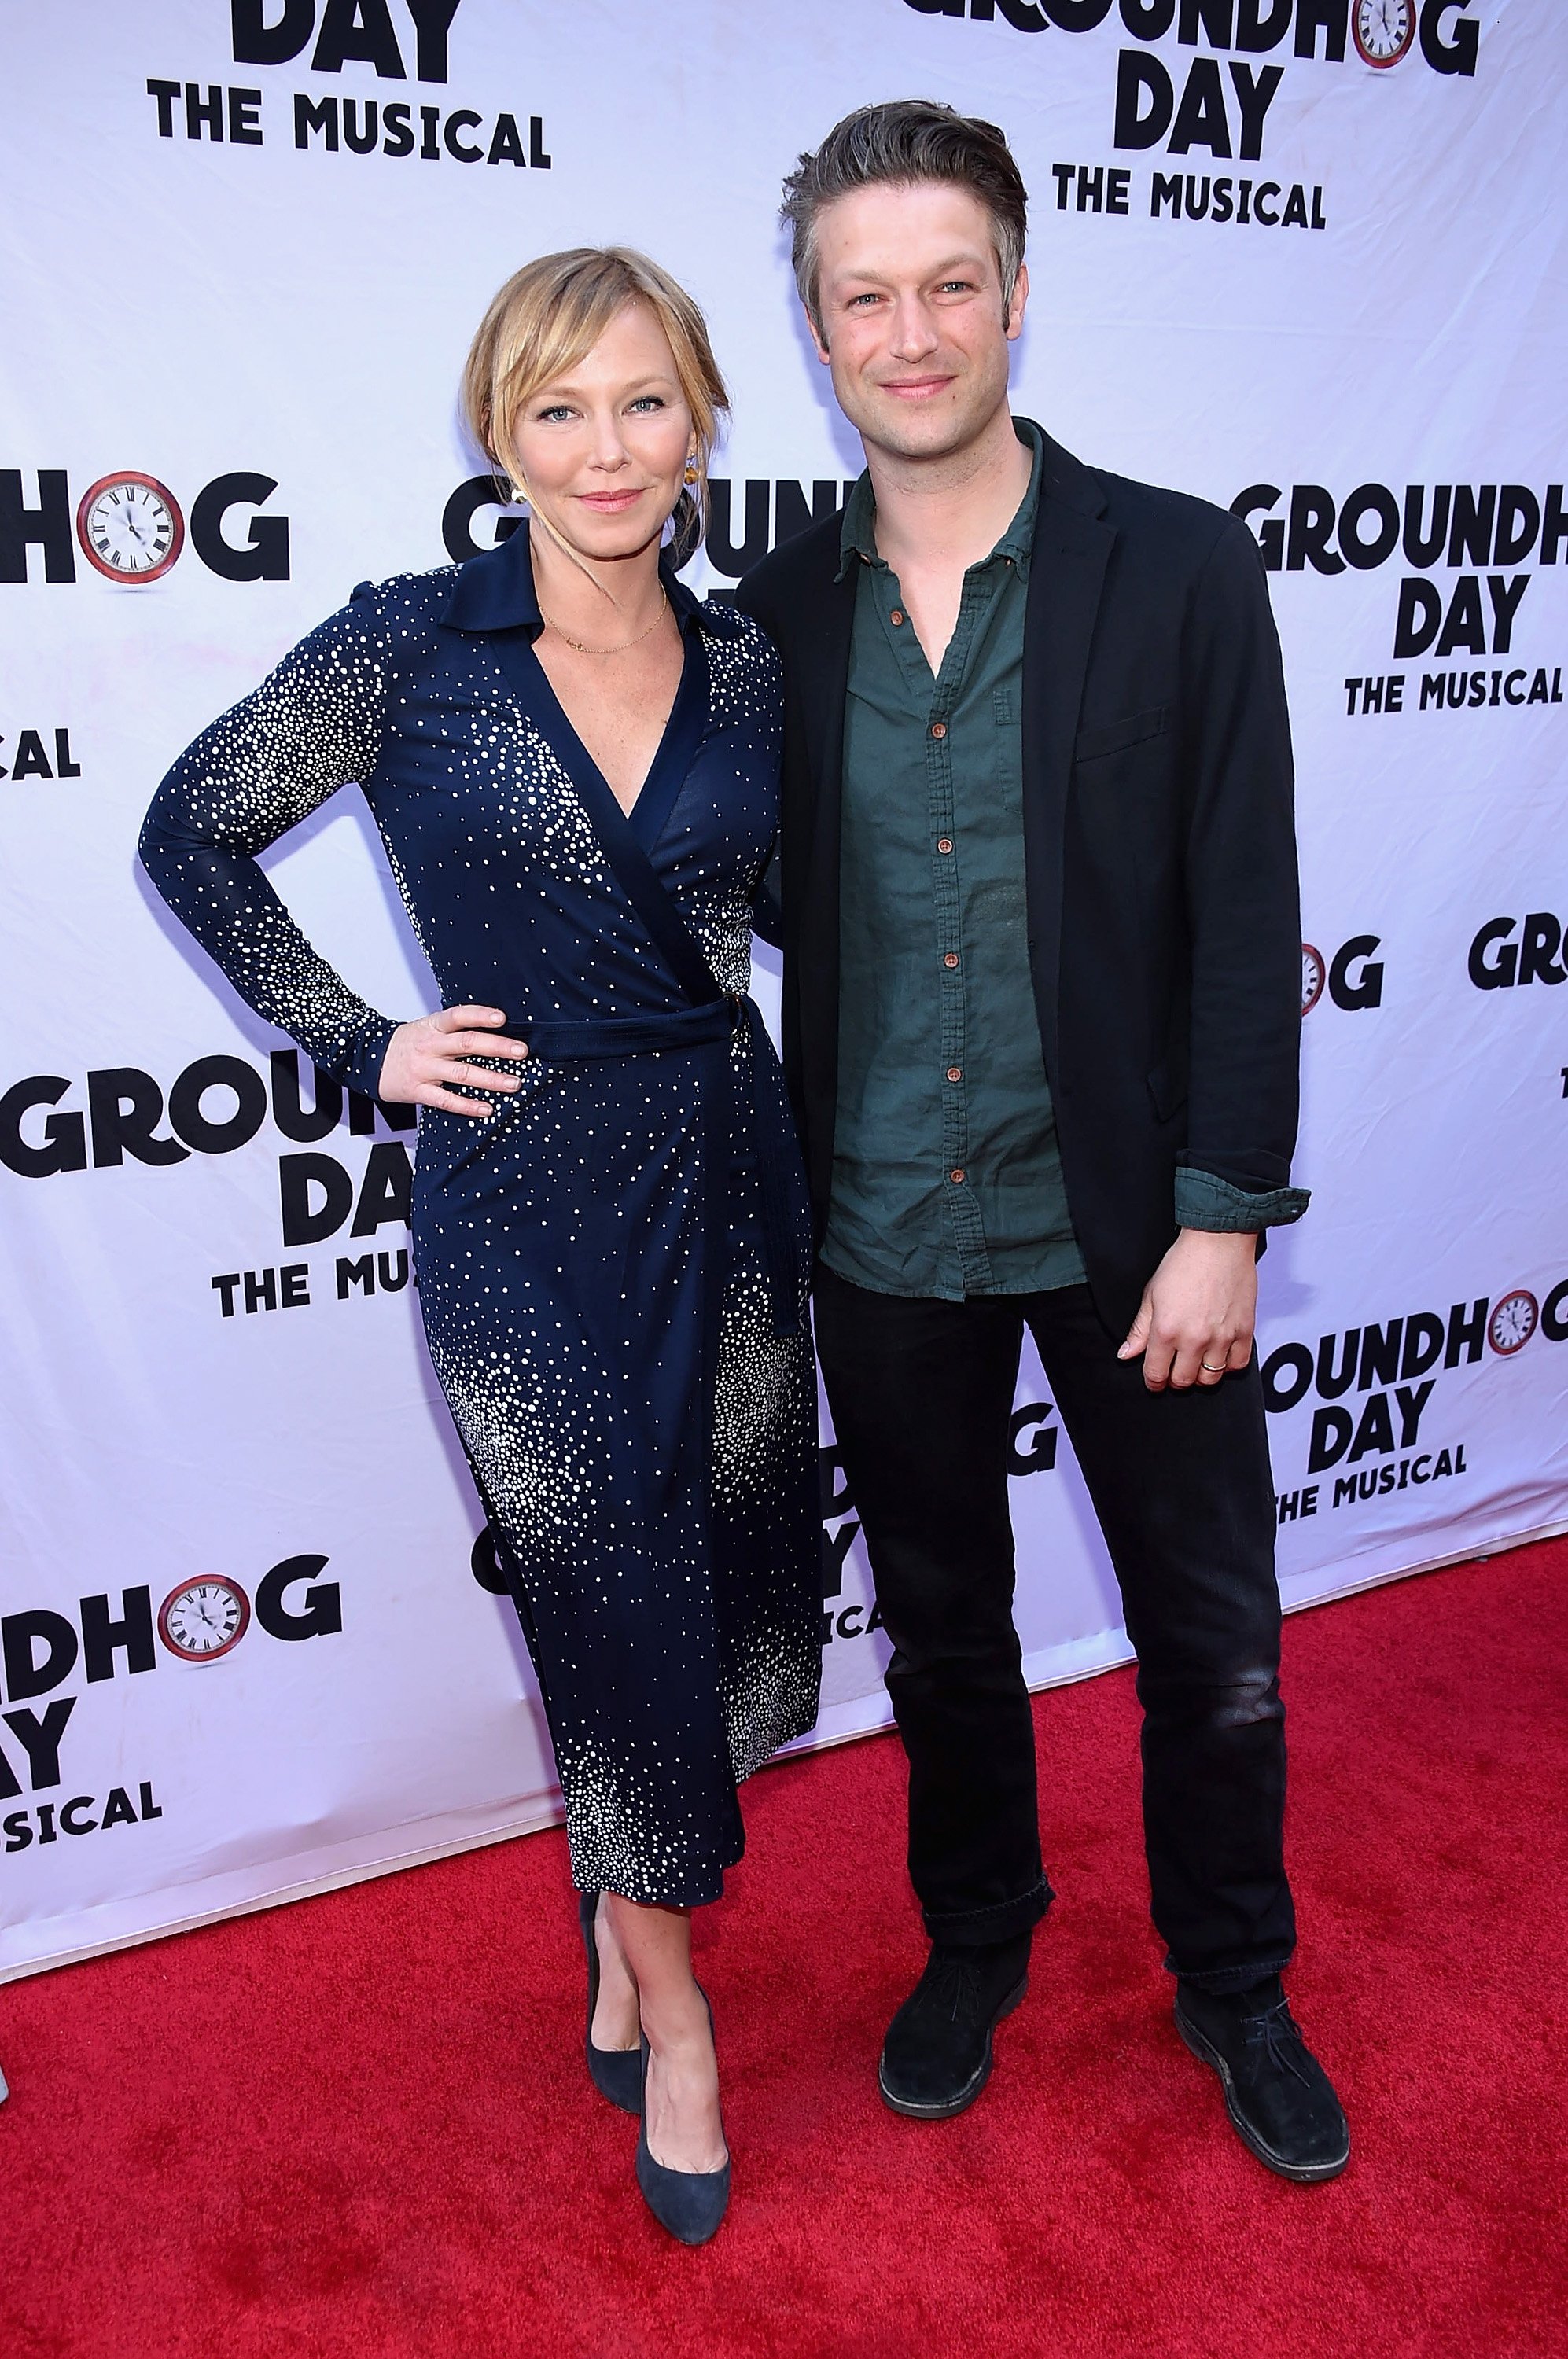 Kelli Giddish and Peter Scanavino from "Law & Order: SVU"  attend the "Groundhog Day" Broadway Opening Night on April 17, 2017 | Photo: GettyImages